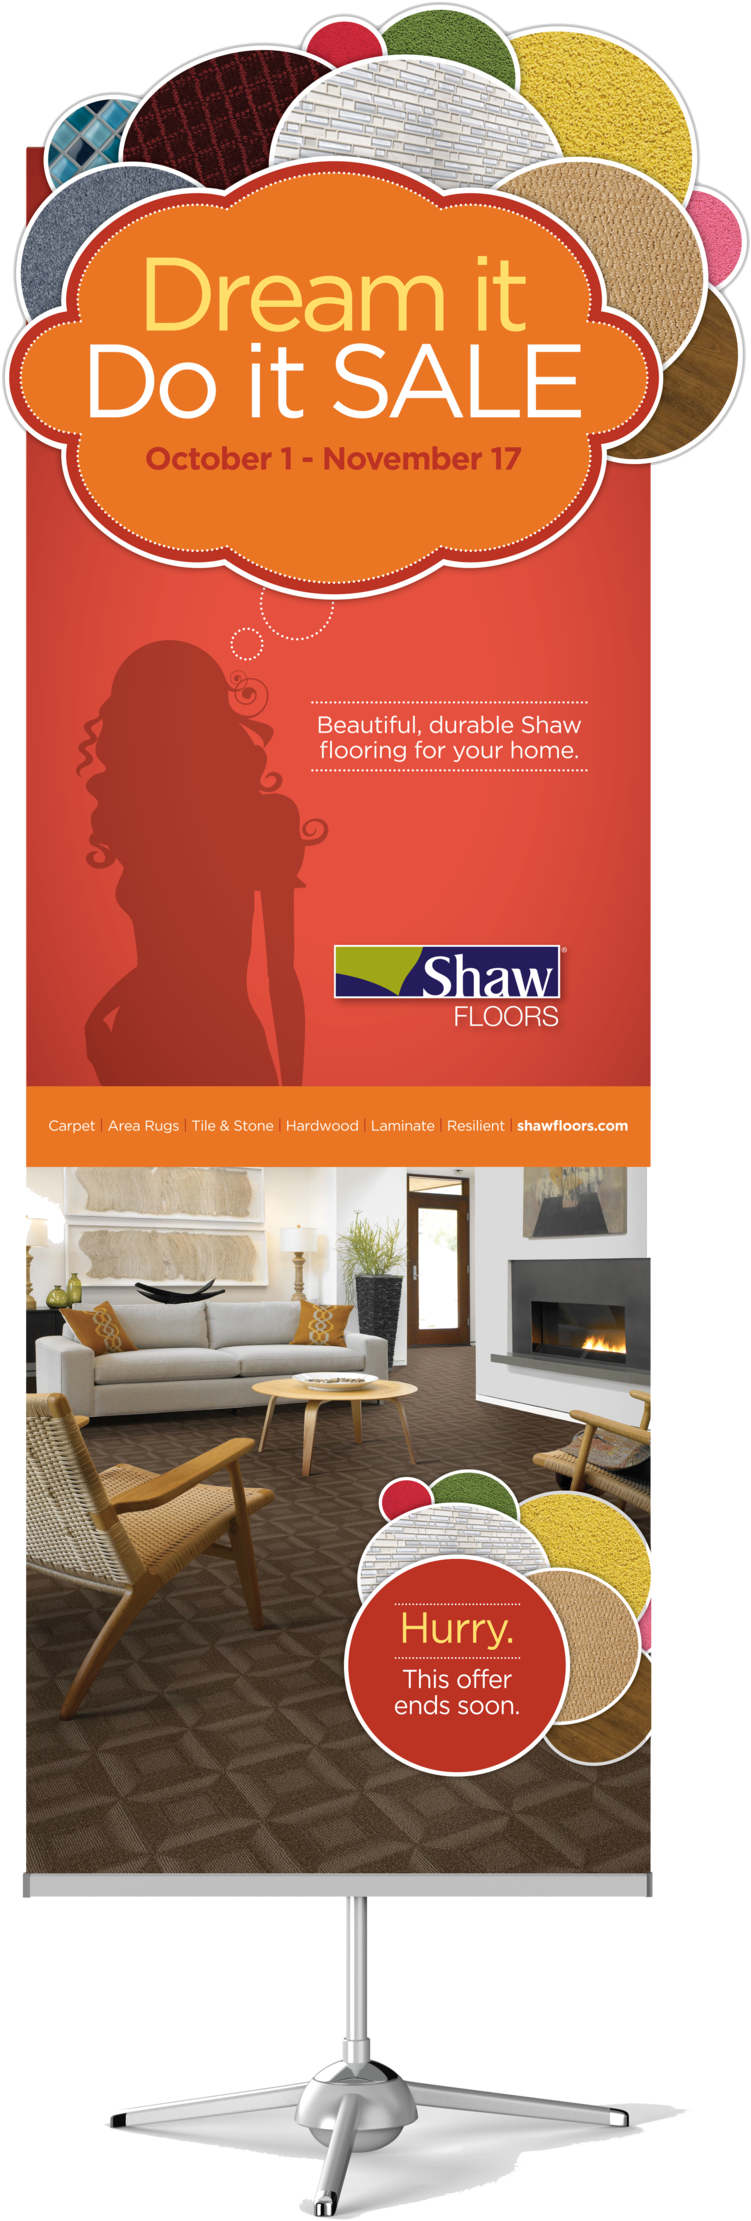 Shaw Floors Promotion (1000x2460), Png Download